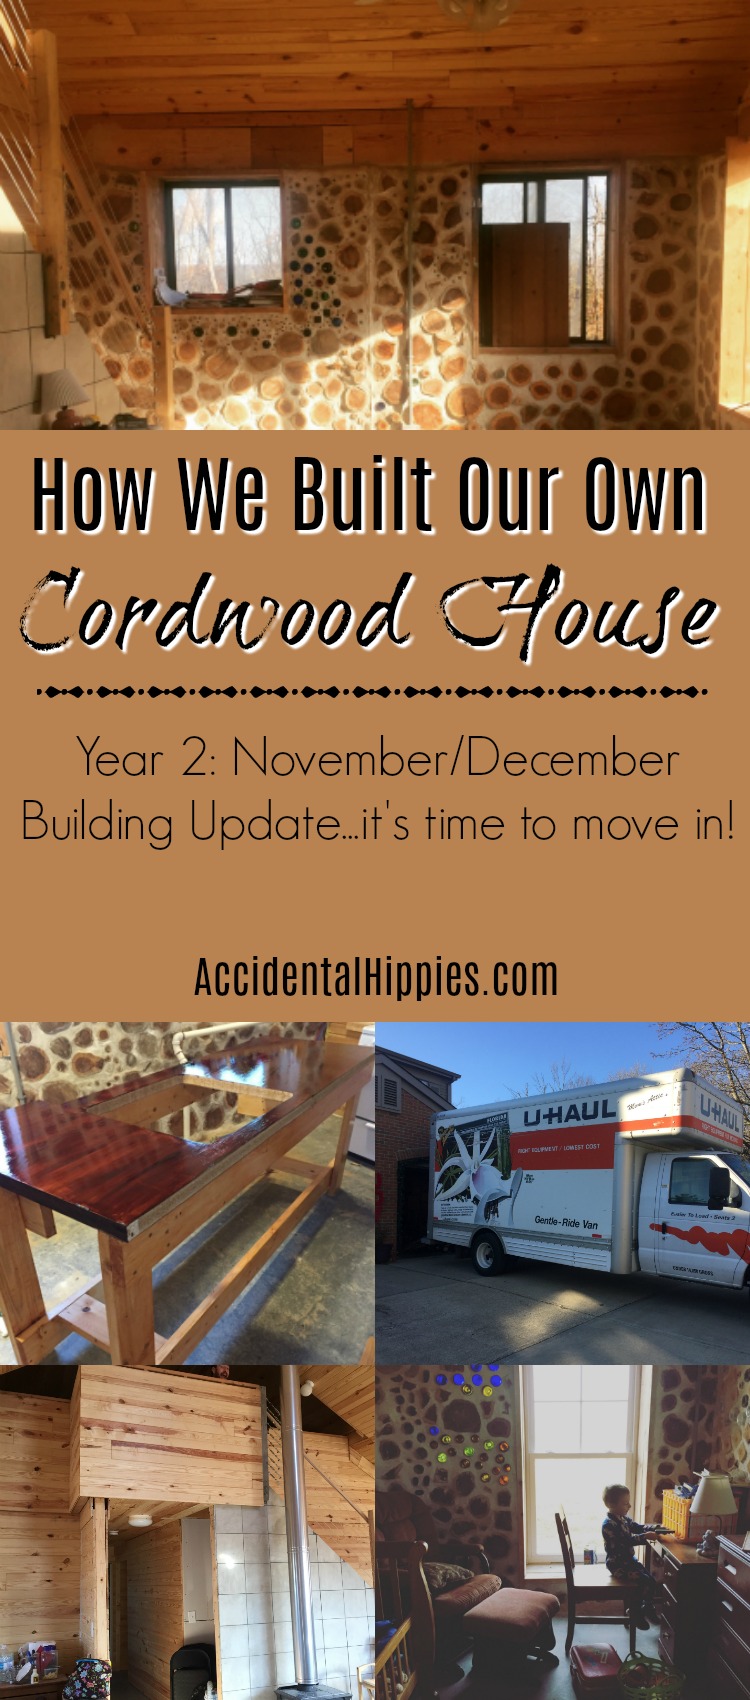 We built our own cordwood home from scratch! In this progress update, see what we did to finalize things before we officially moved in. Project overviews, details, and more.